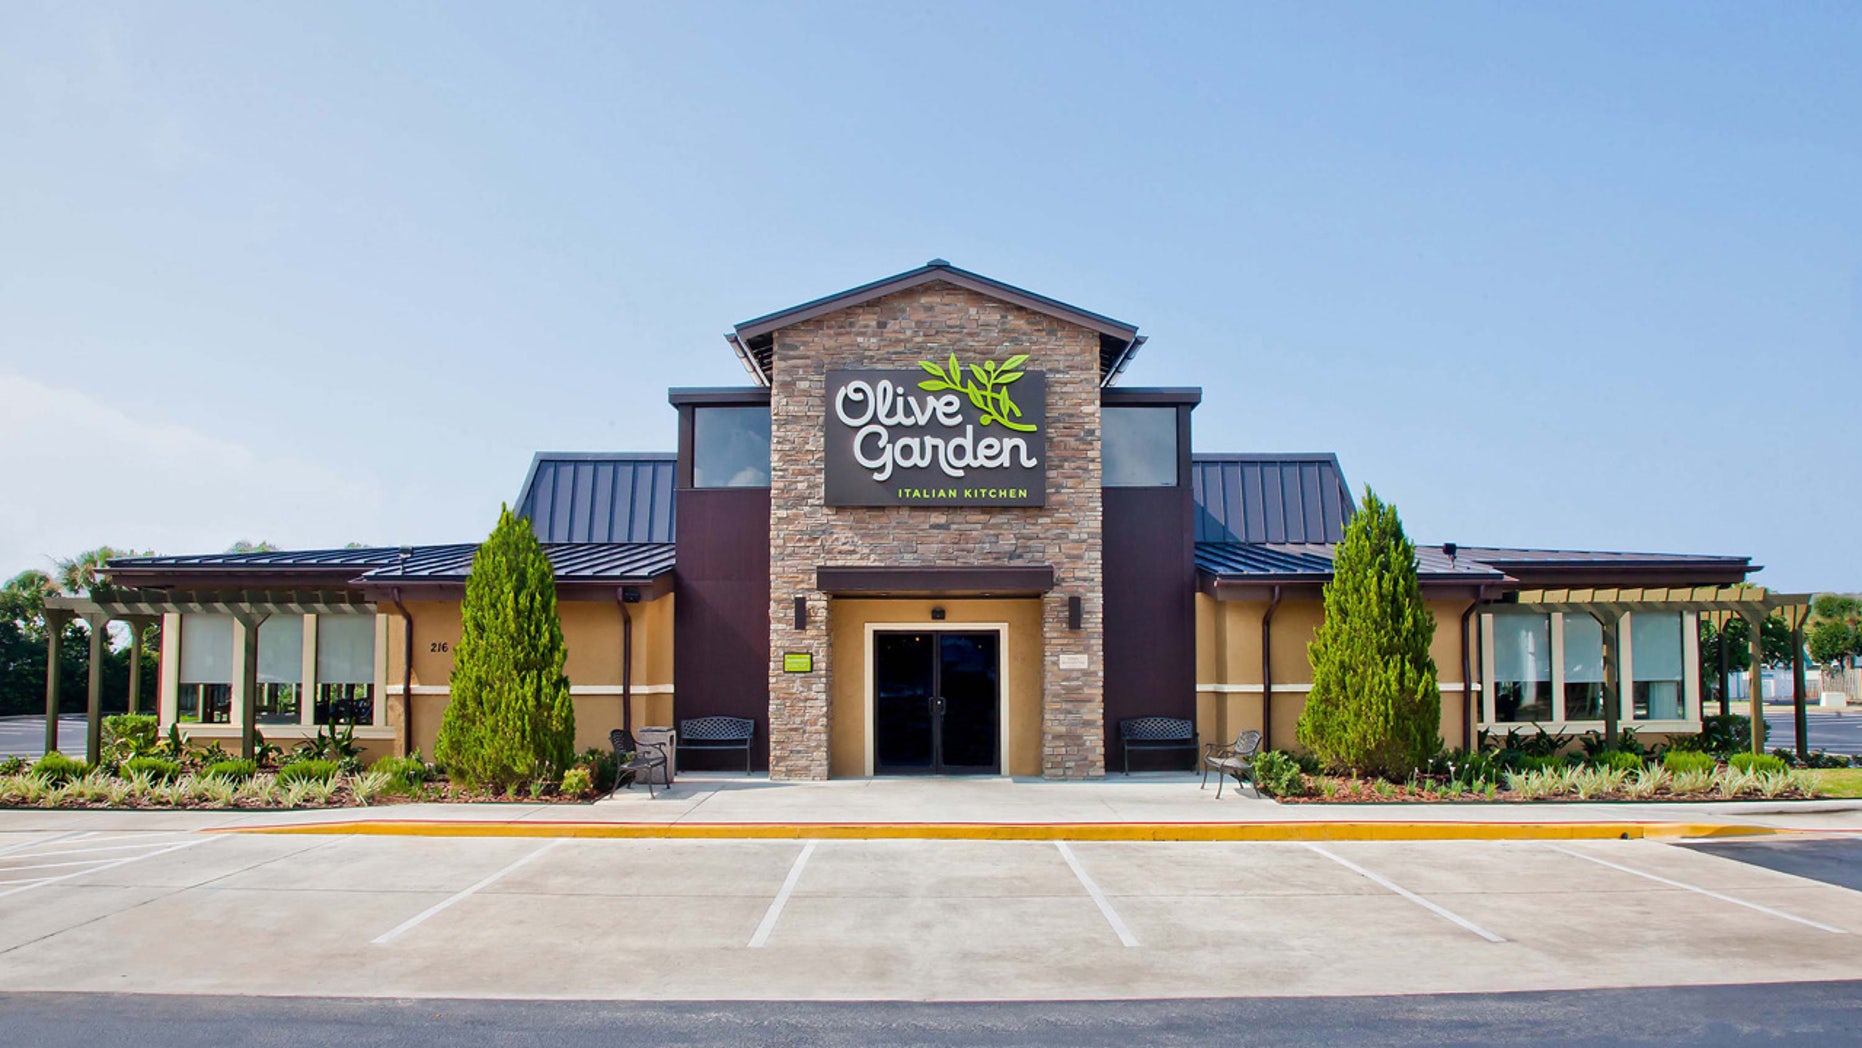 Olive Garden Parent Company Says It Would Be Helpful If Other